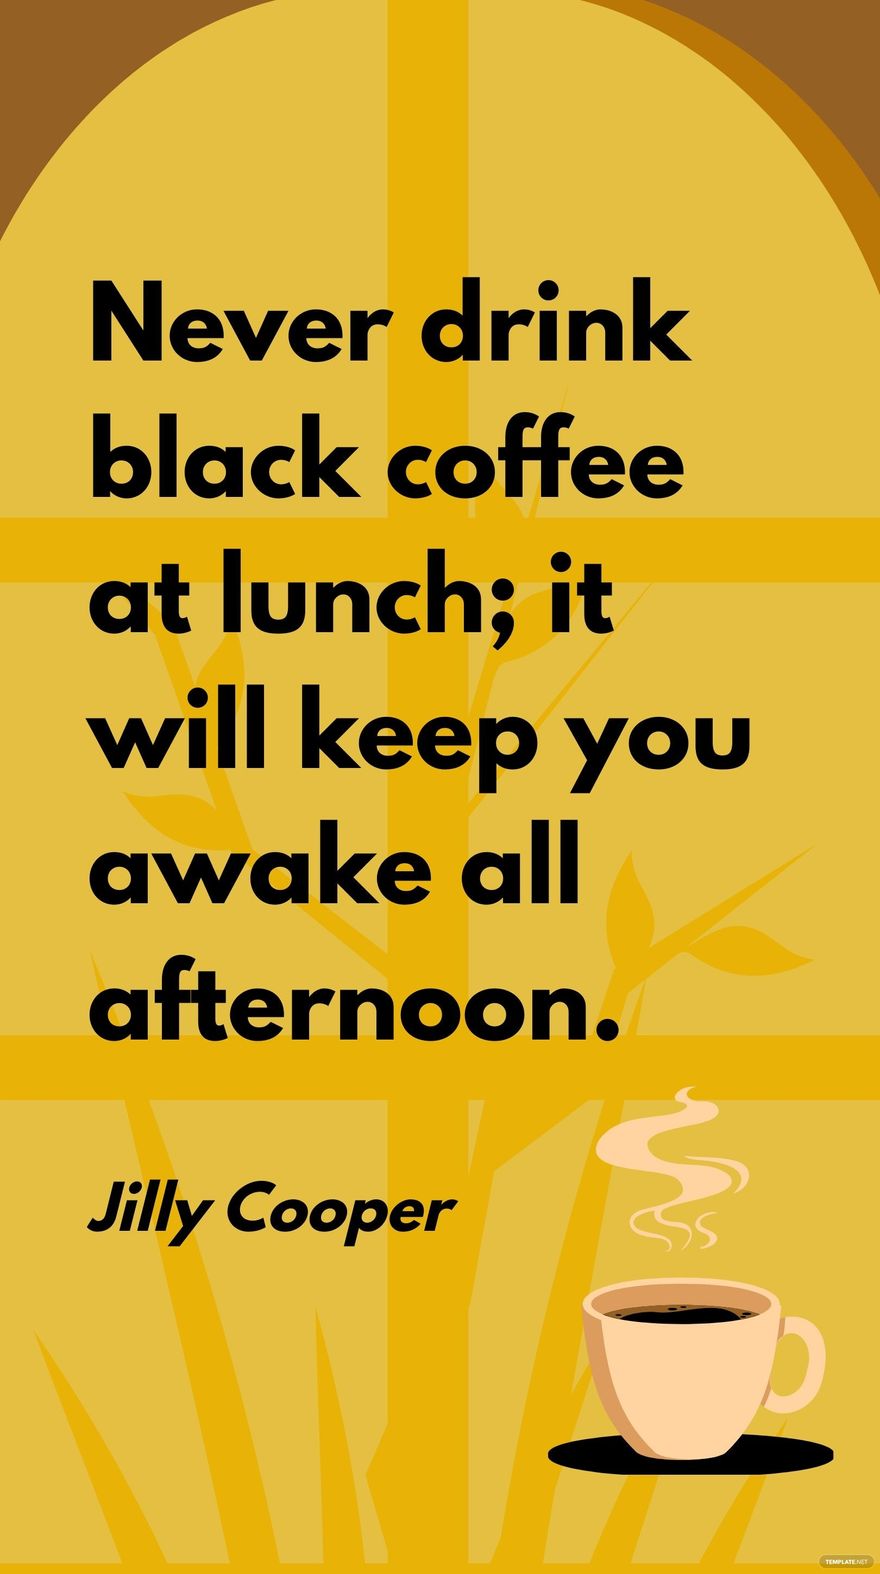 Free Jilly Cooper - Never drink black coffee at lunch; it will keep you awake all afternoon. in JPG